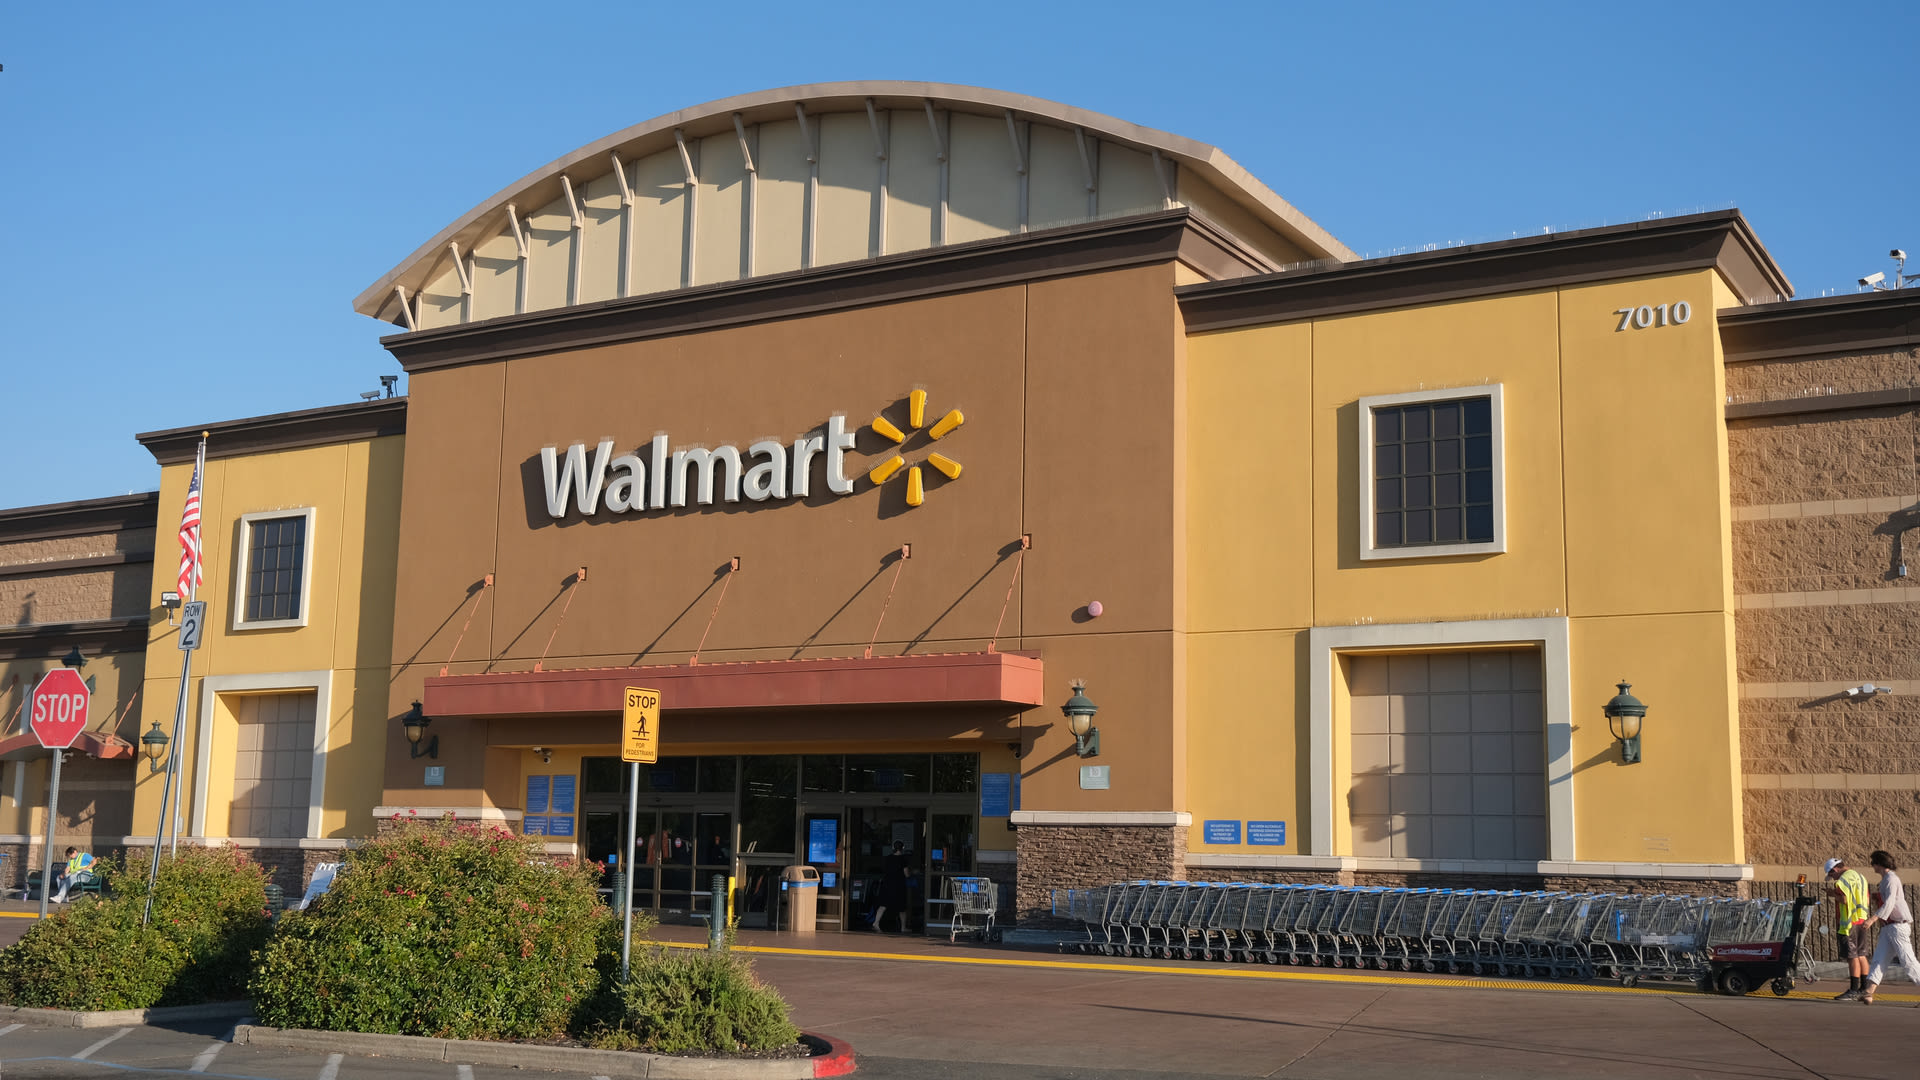 Just Bought a House? The Best Deals on Home Goods at Walmart